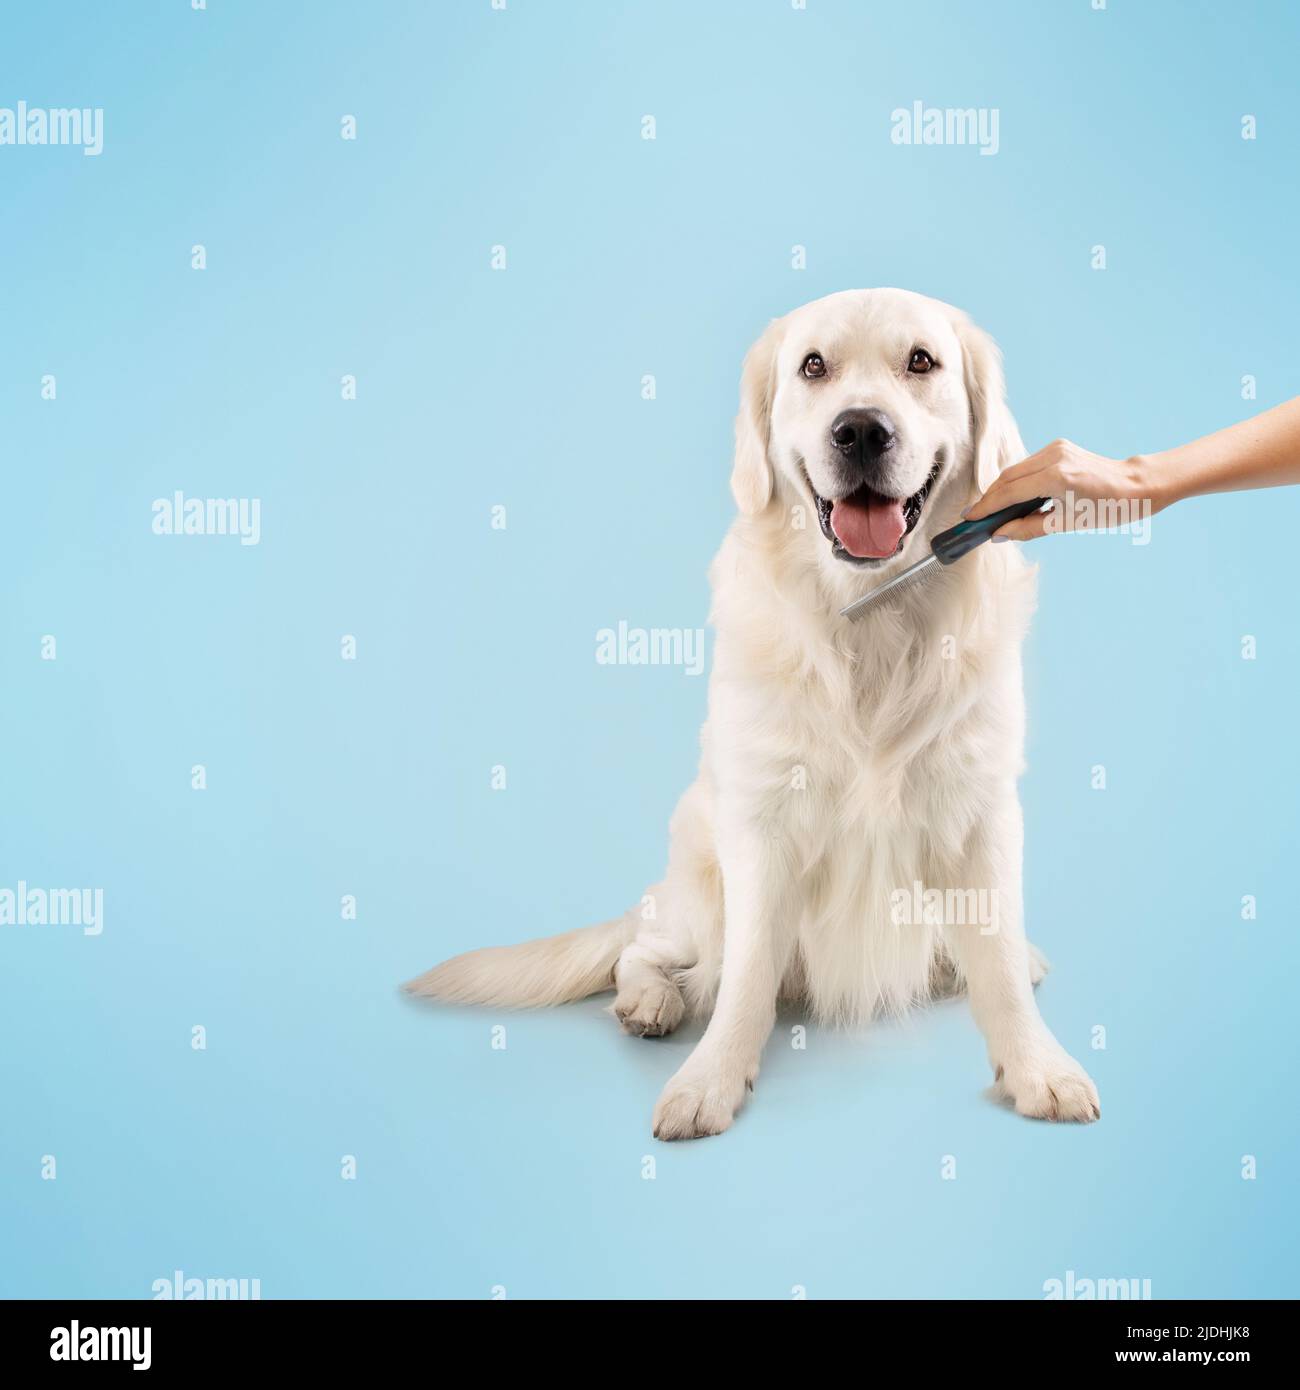 Grooming domestic pet concept. Happy healthy labrador dog sitting on the floor, person combing pet's fur hair Stock Photo